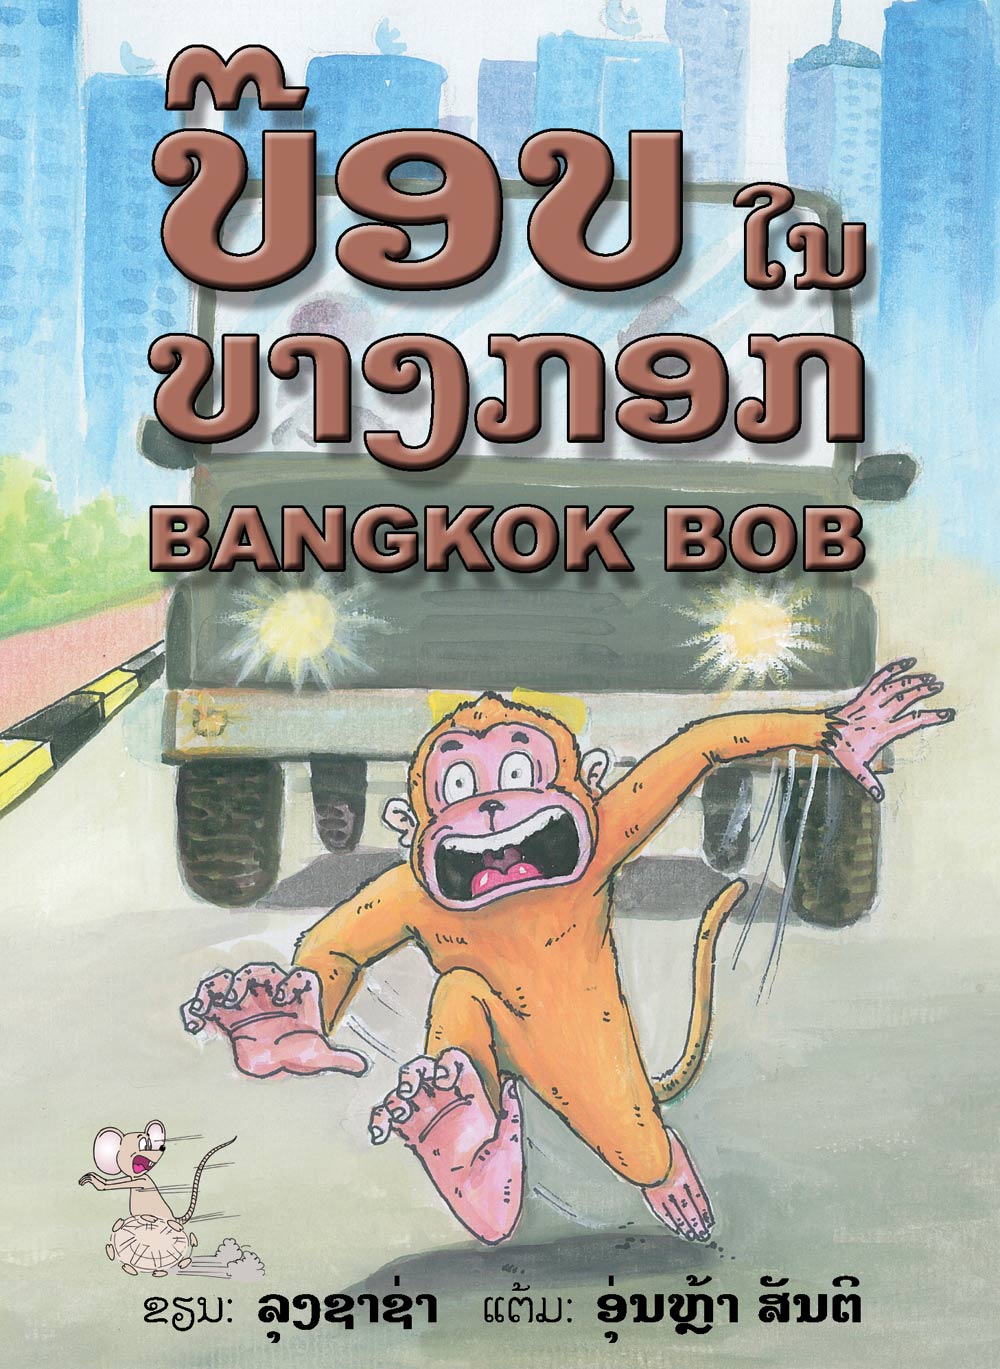 Bangkok Bob large book cover, published in Lao and English